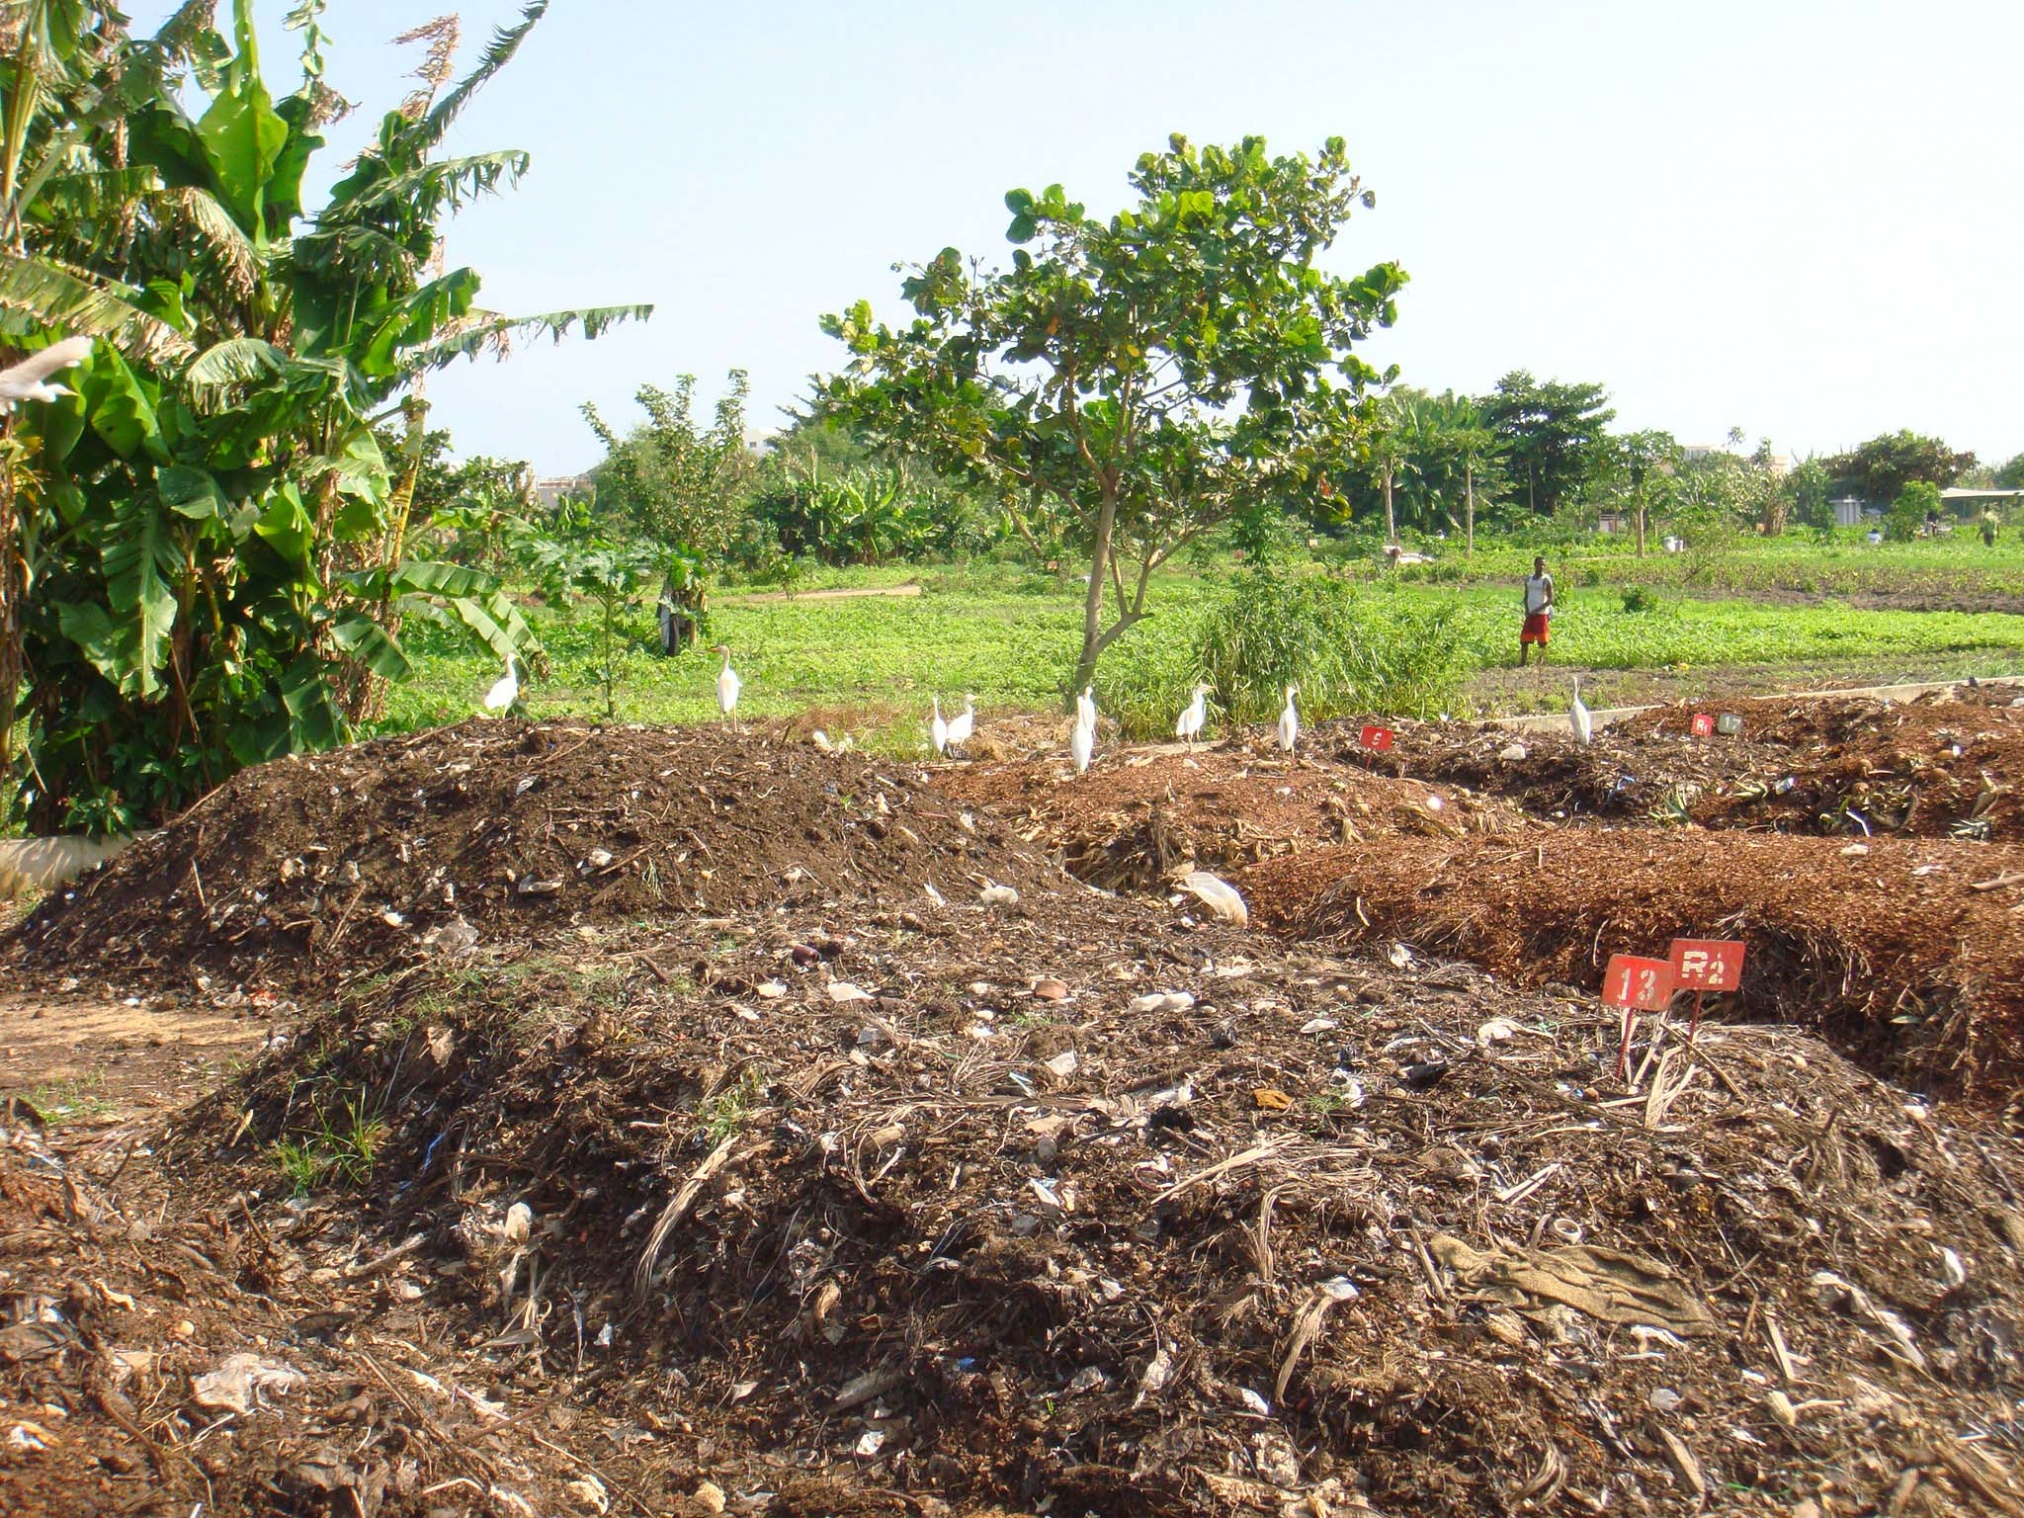 Compost_before_sifting_(there_is_other_material_in_it_for_example_plastic_waste)._(5817733310).jpg